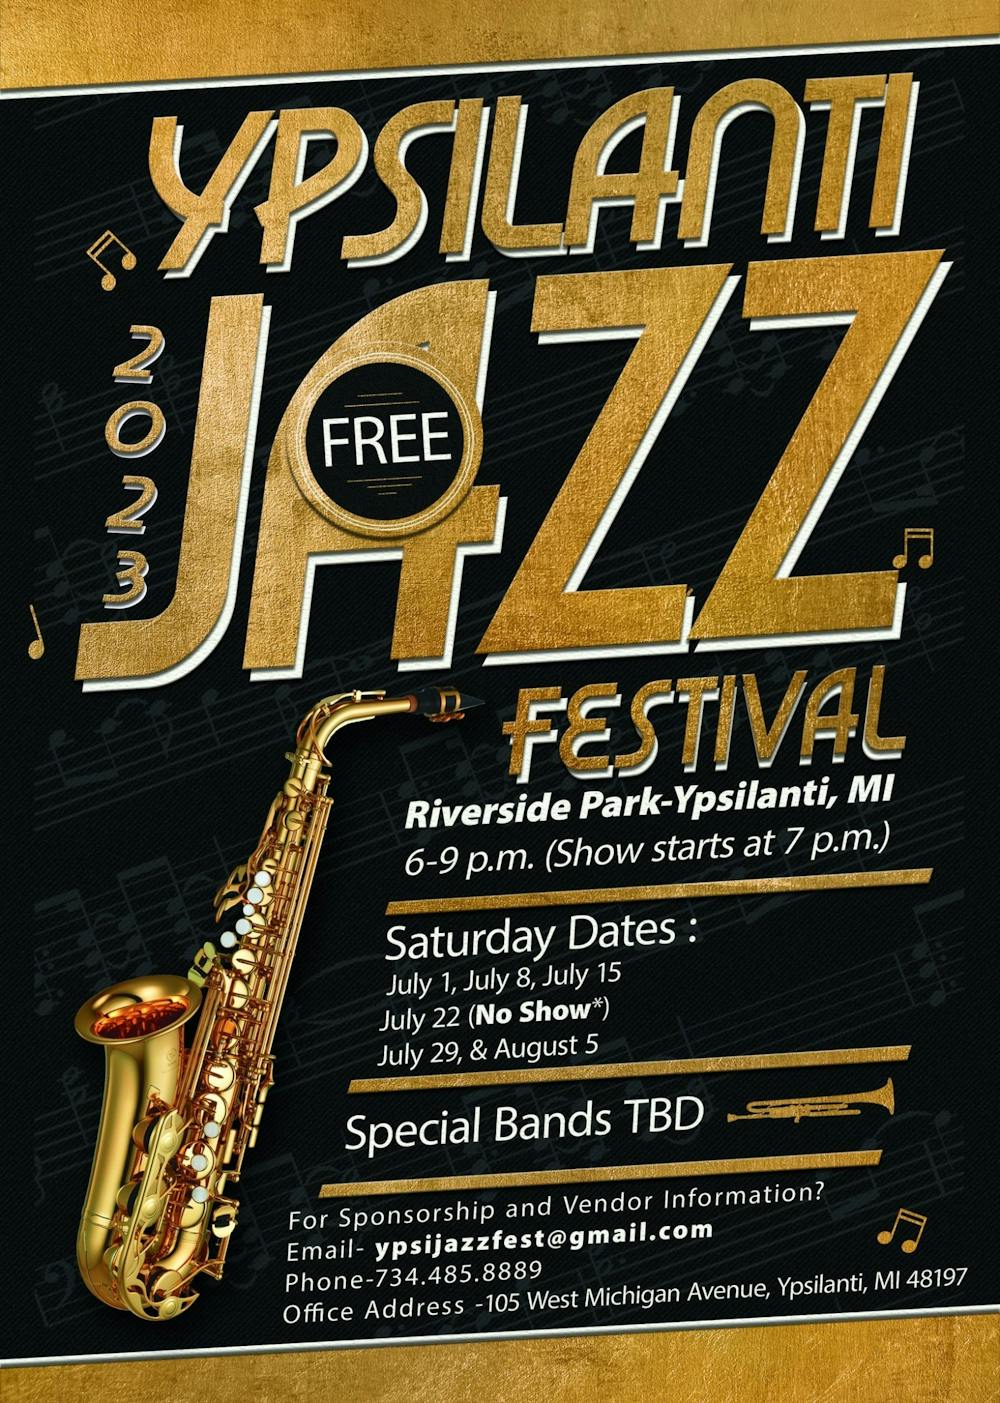 Ypsilanti Jazz Festival returns with music and festivities for the community